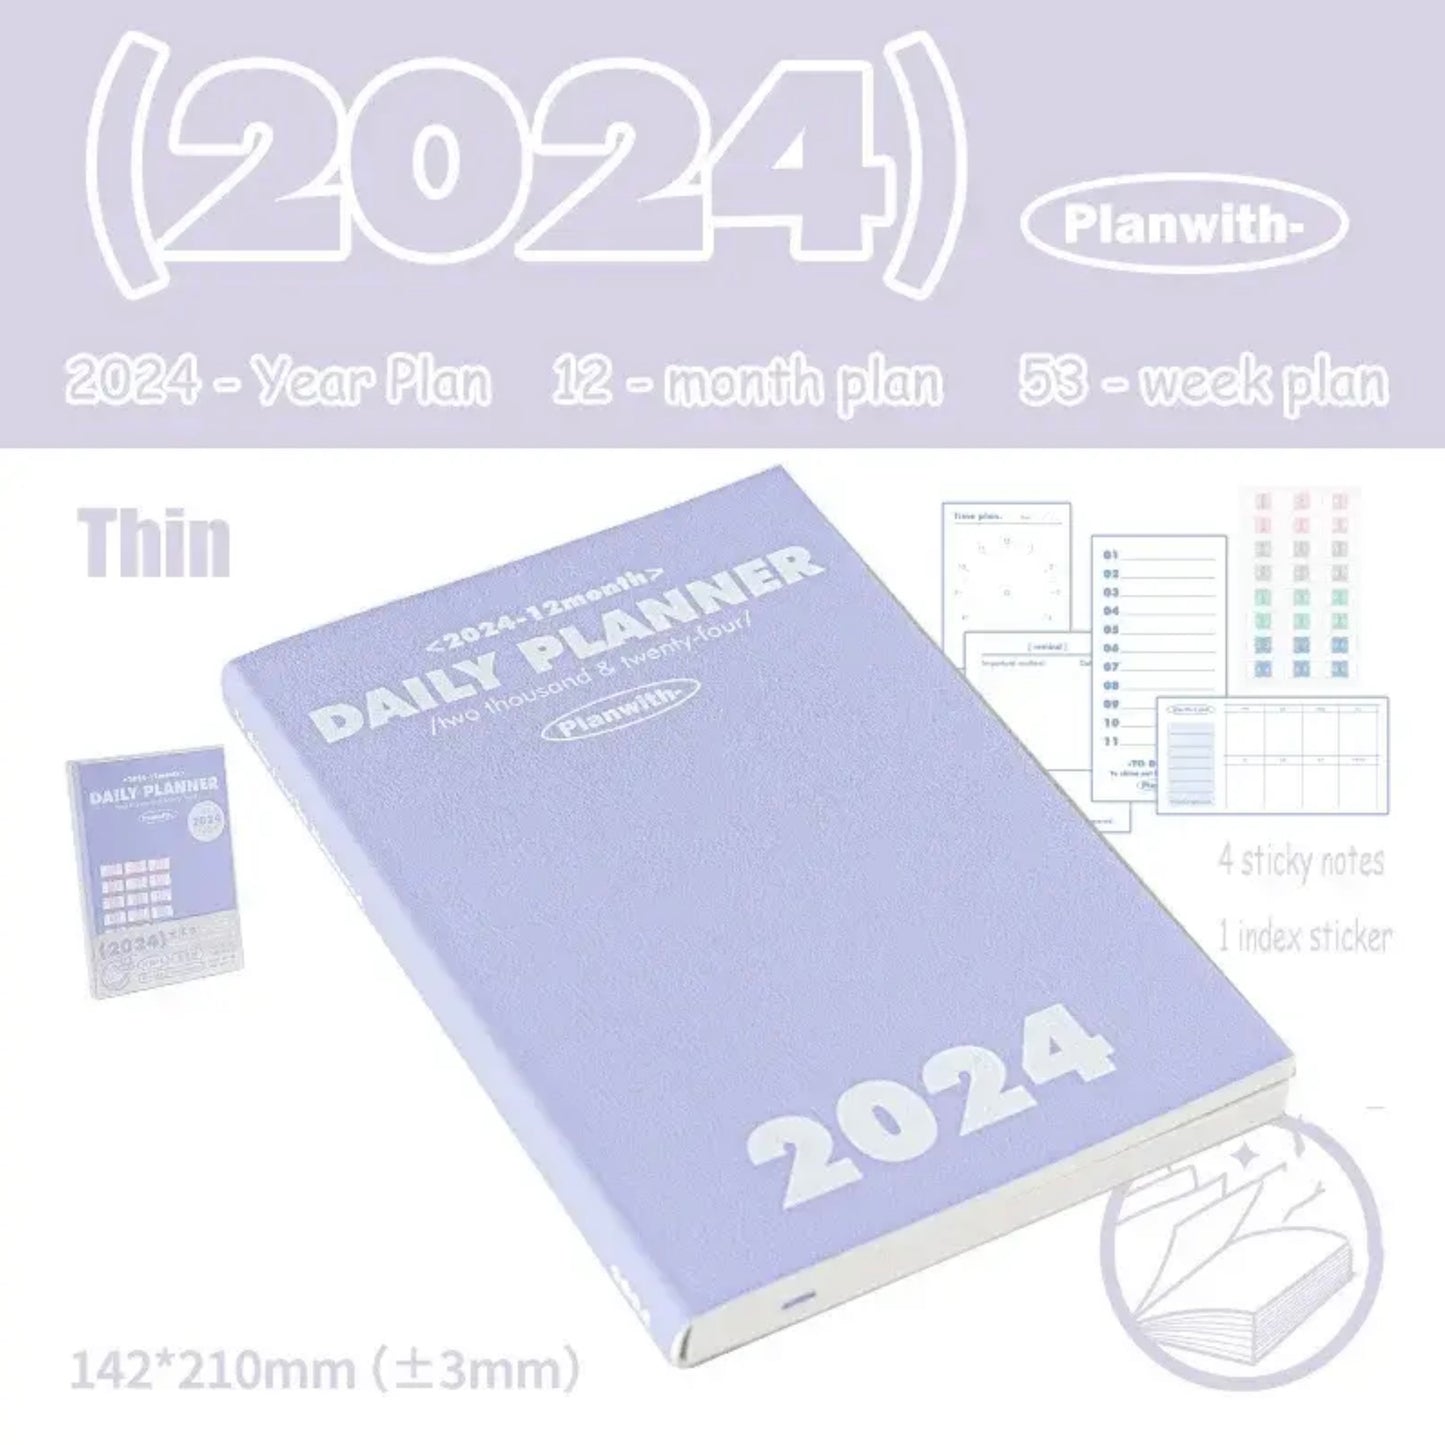 Planner Diario 2024 Planwith